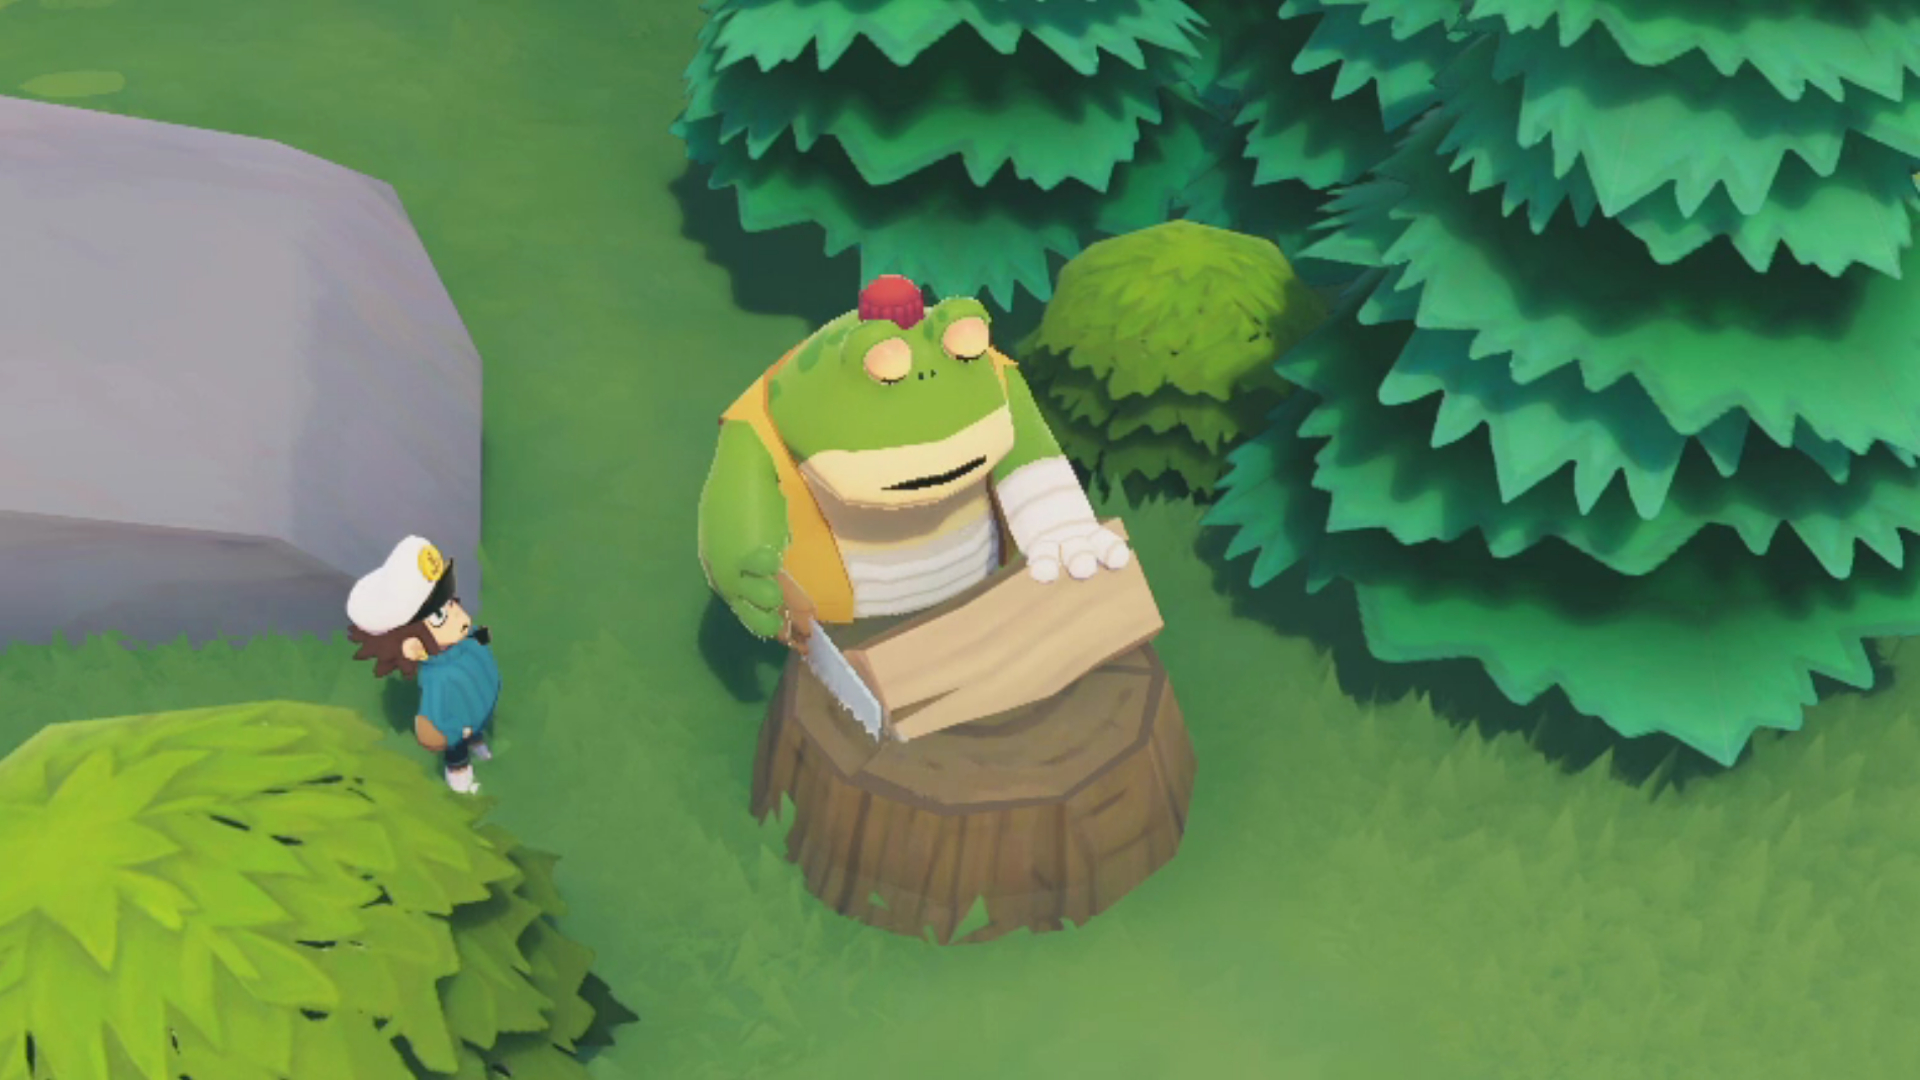  Barter with frogs the old-fashioned way in cute indie game Trading Time 